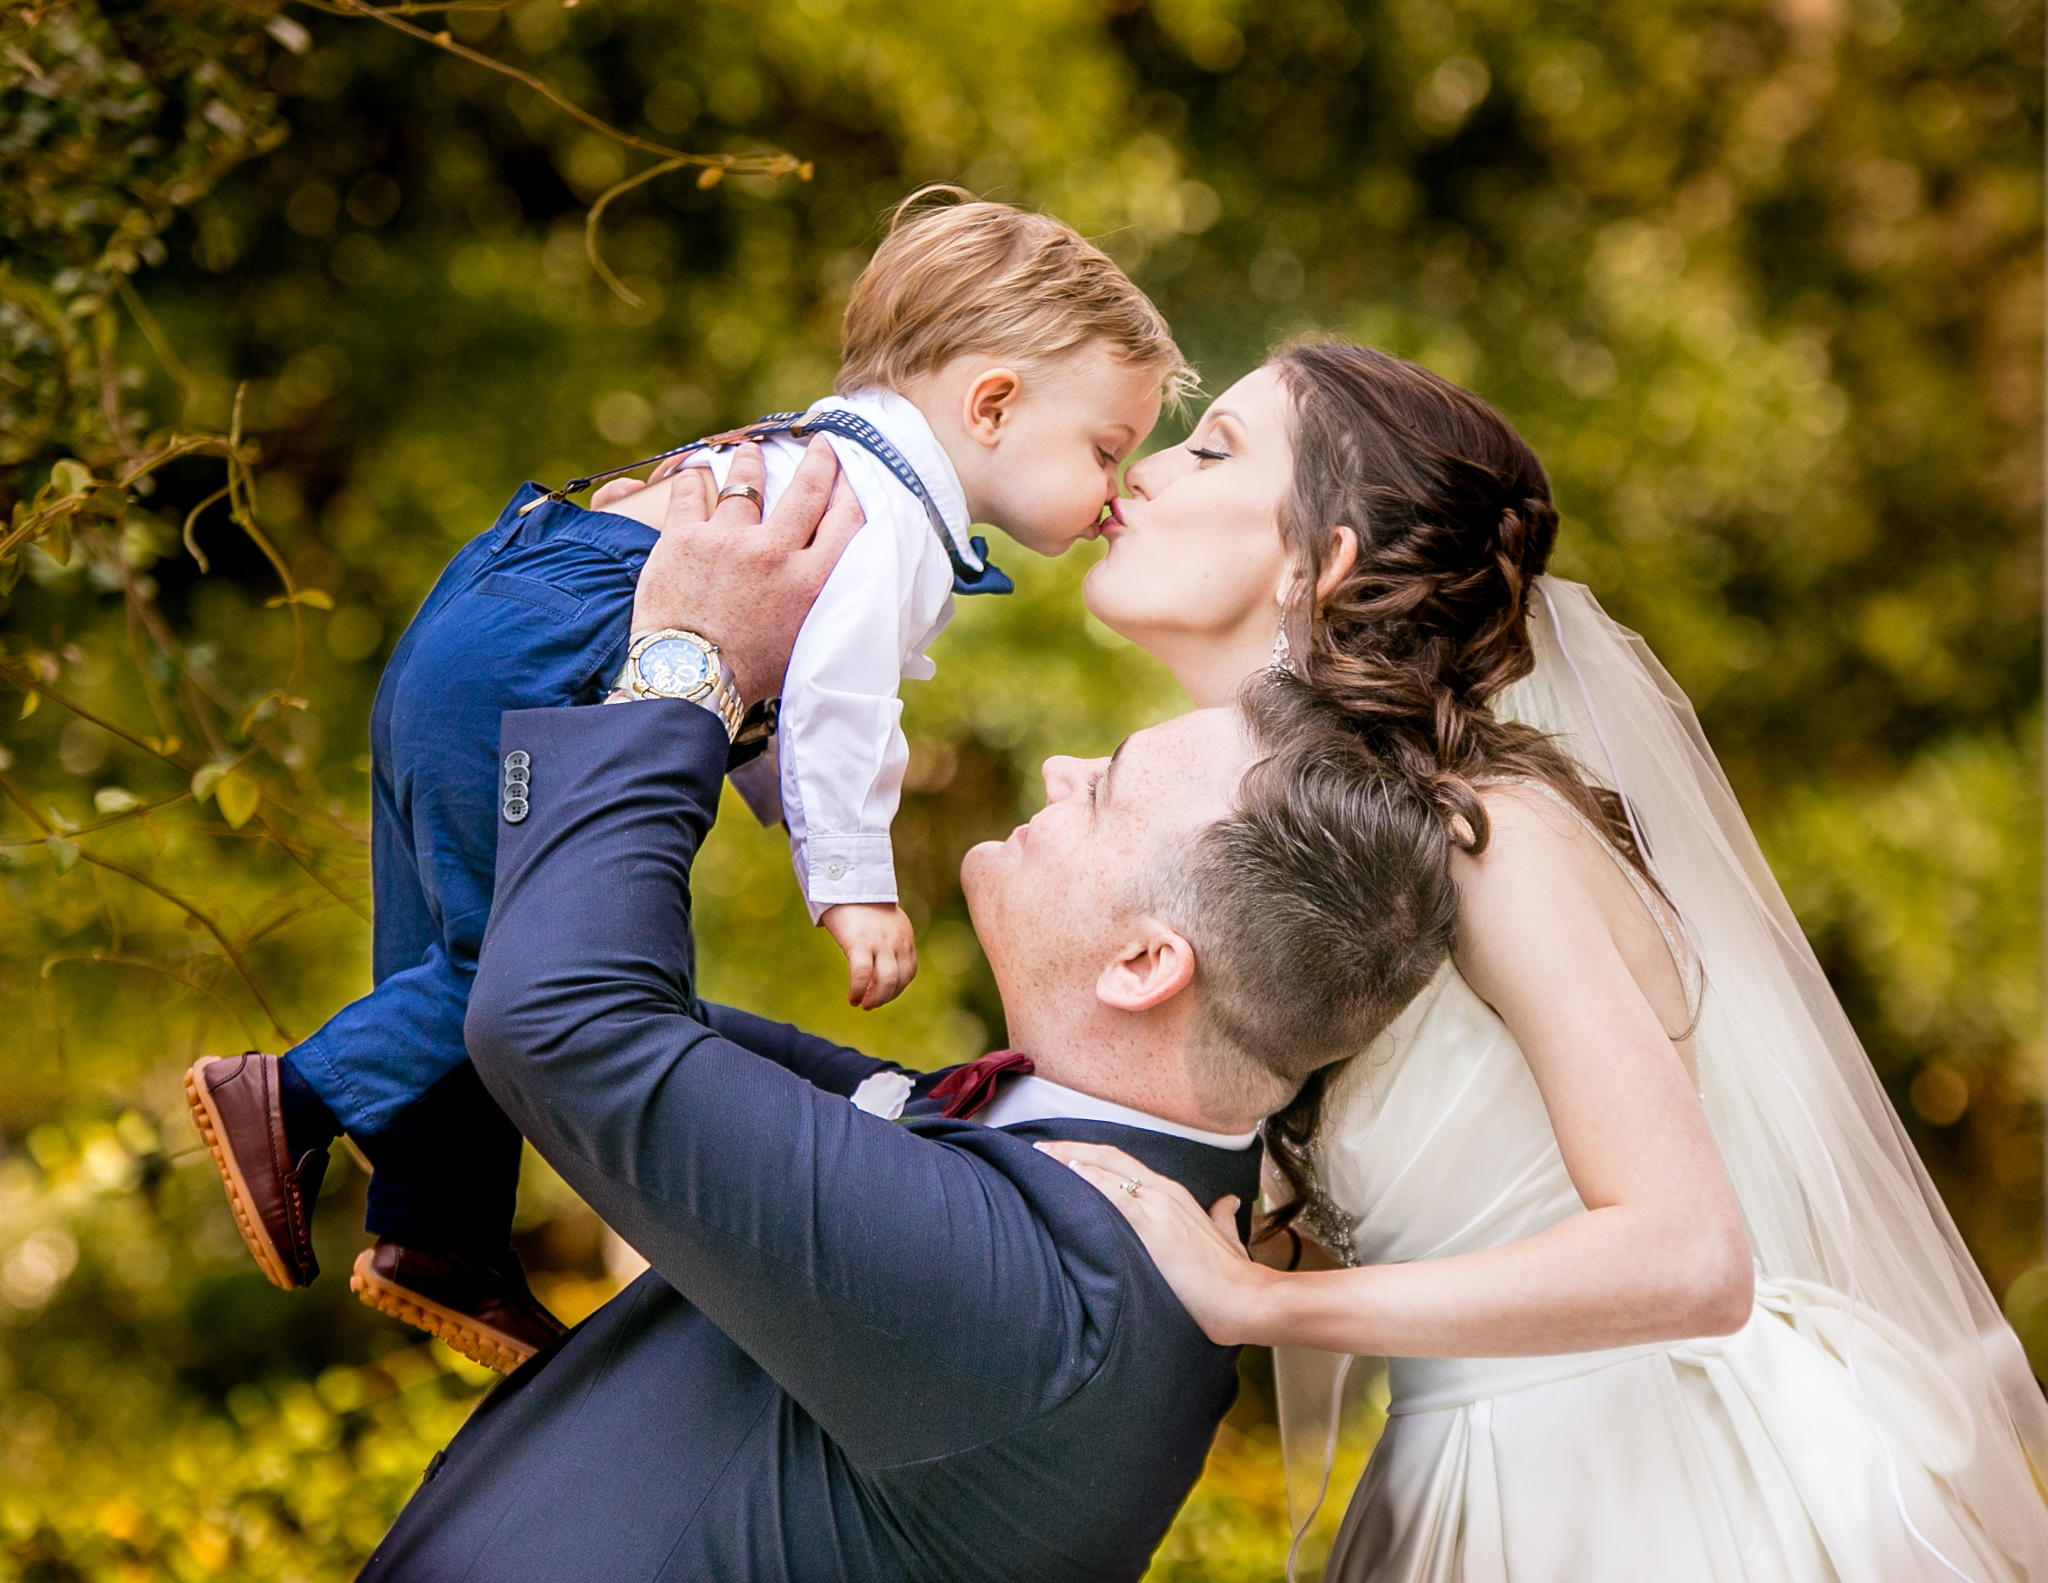 wedding photographer | Michelle Coombs Photography